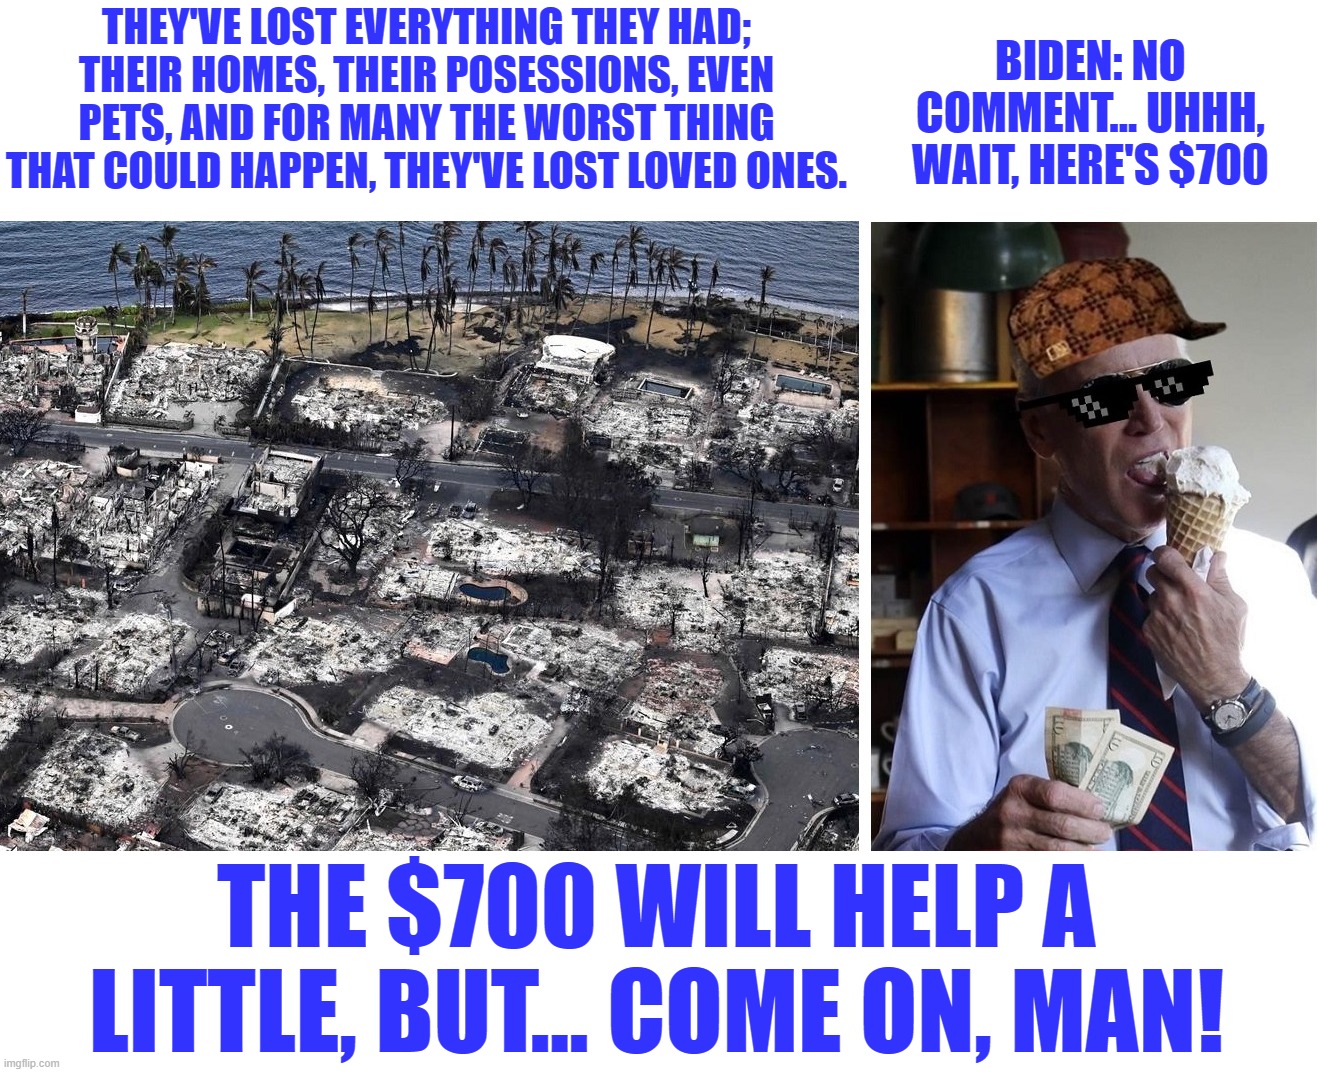 From no comment to $700.  Presidenting is hard, right Dementia Joe? | THEY'VE LOST EVERYTHING THEY HAD; THEIR HOMES, THEIR POSESSIONS, EVEN PETS, AND FOR MANY THE WORST THING THAT COULD HAPPEN, THEY'VE LOST LOVED ONES. BIDEN: NO COMMENT... UHHH, WAIT, HERE'S $700; THE $700 WILL HELP A LITTLE, BUT... COME ON, MAN! | image tagged in liberal hypocrisy,liberal logic,liberal media,hollywood liberals,stupid liberals,biden | made w/ Imgflip meme maker